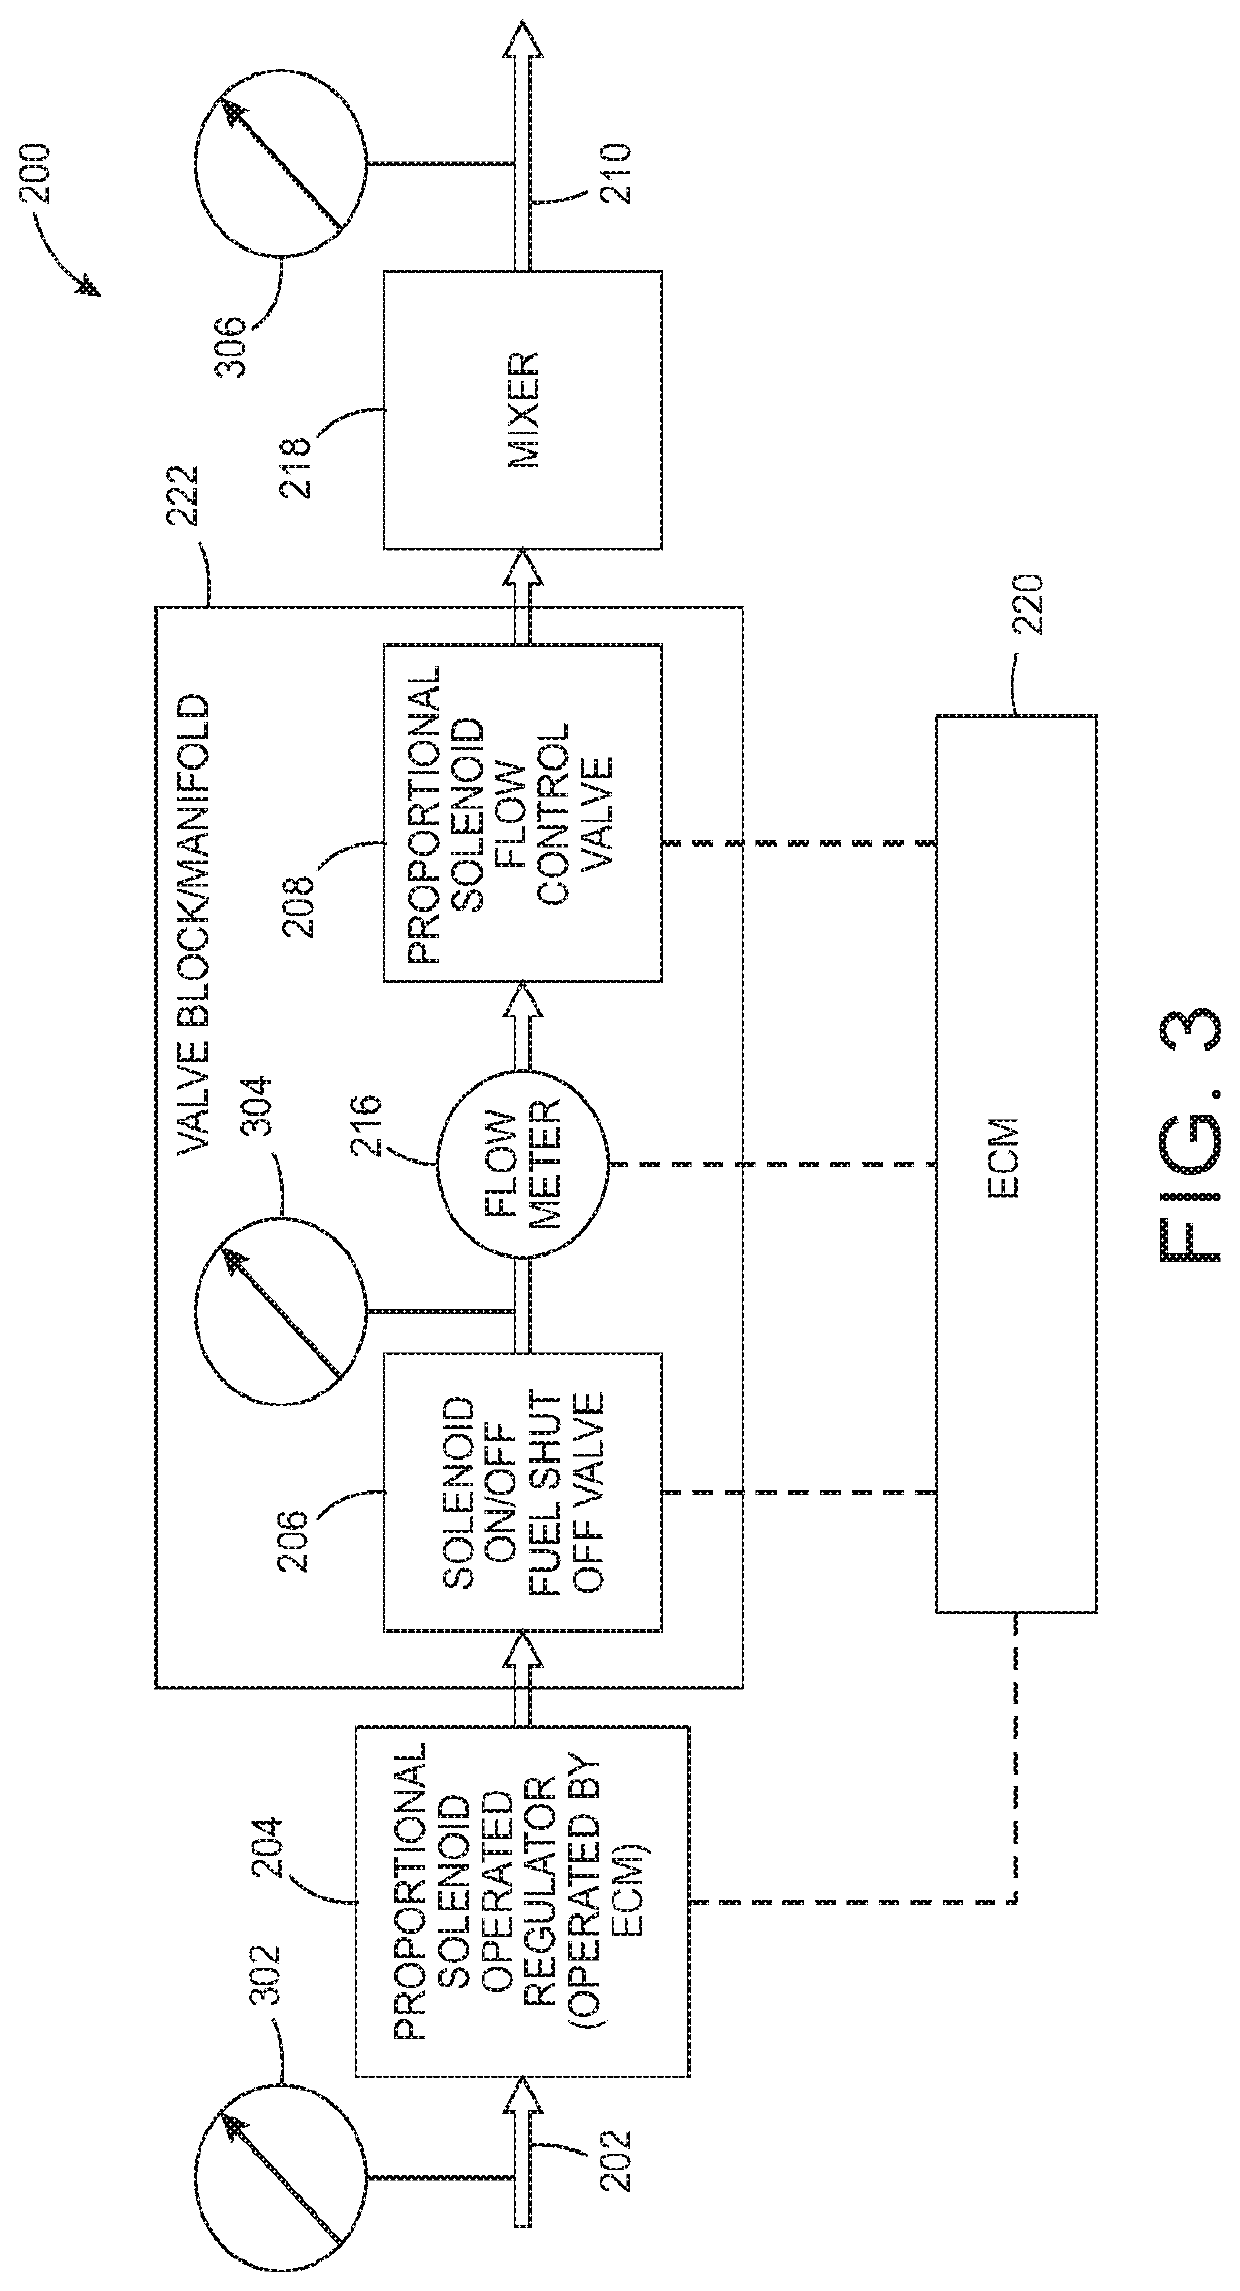 Flow control method, system and apparatus